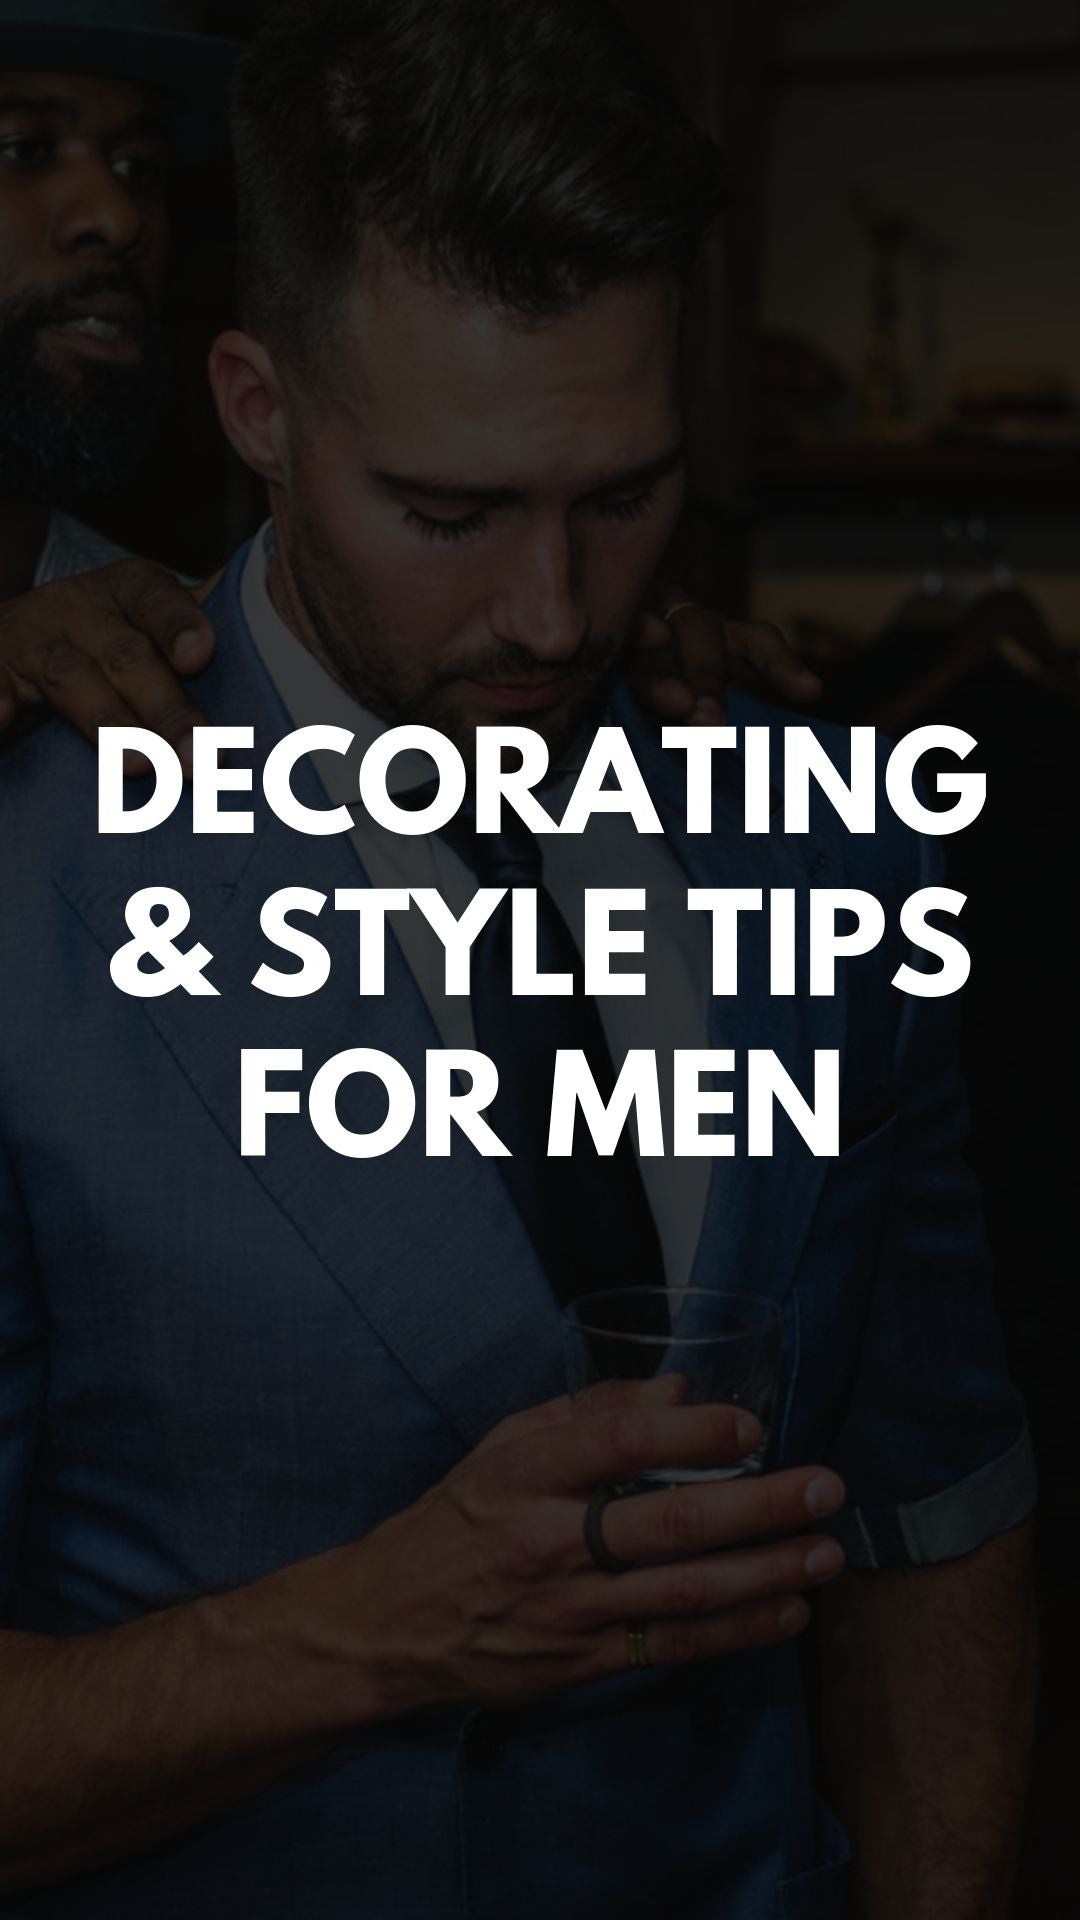 Decorating & Style Tips for Men